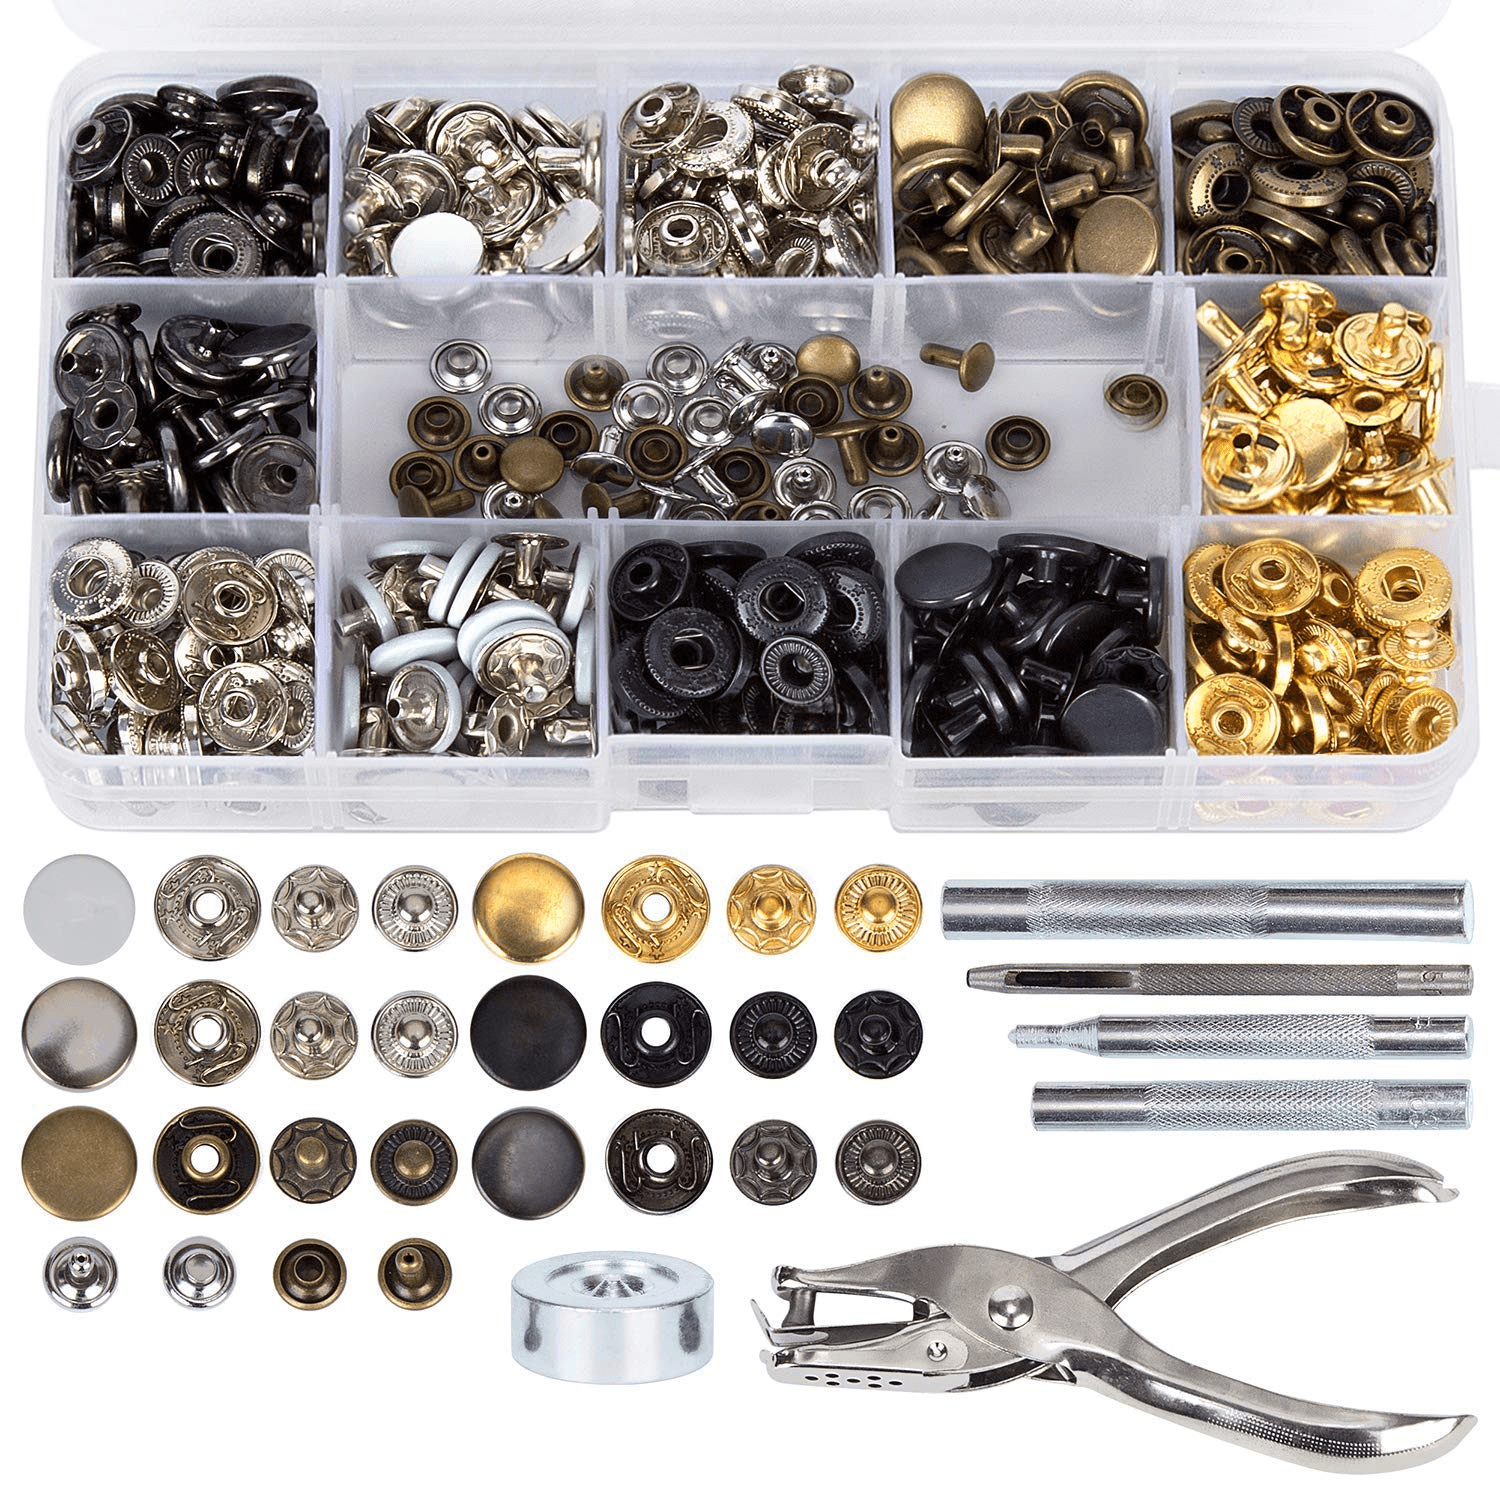 Trimming Shop 20mm S Spring Press Studs 4 Part, Durable and Lightweight,  Metal Snap Buttons Fasteners for Jackets, DIY Leathercrafts, Sewing  Clothing